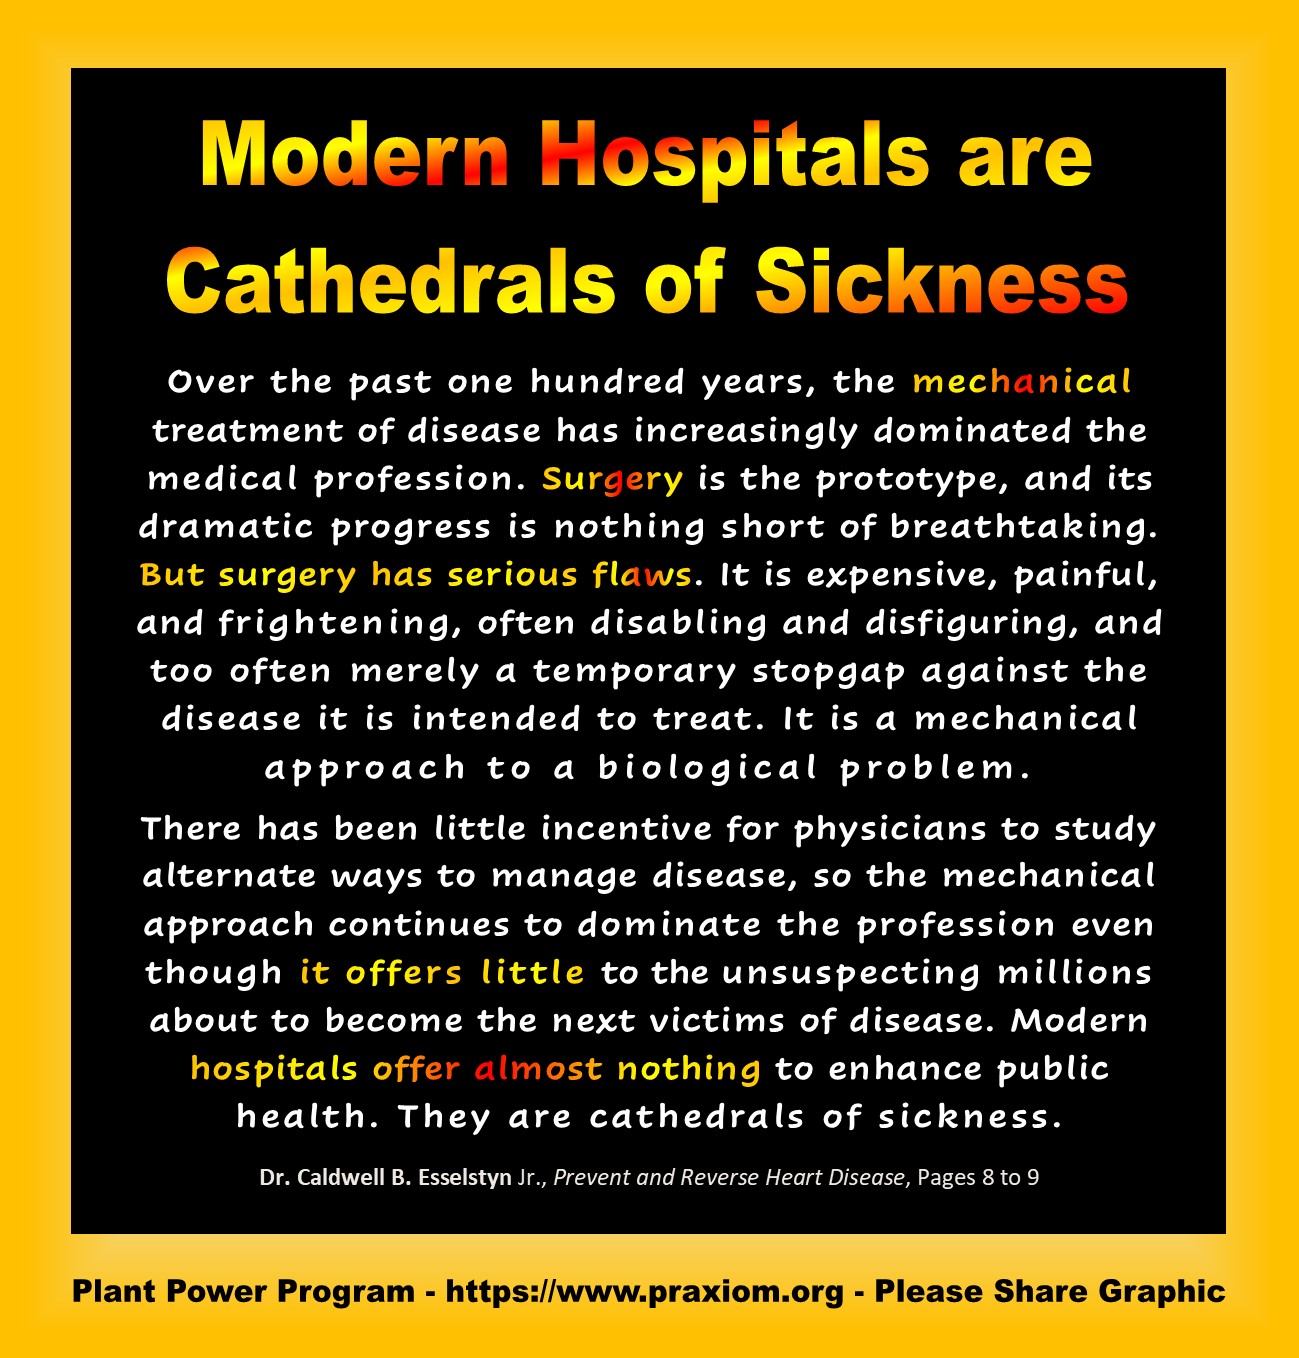 Modern Hospitals are Cathedrals of Sickness - Dr. Calwell Esselstyn